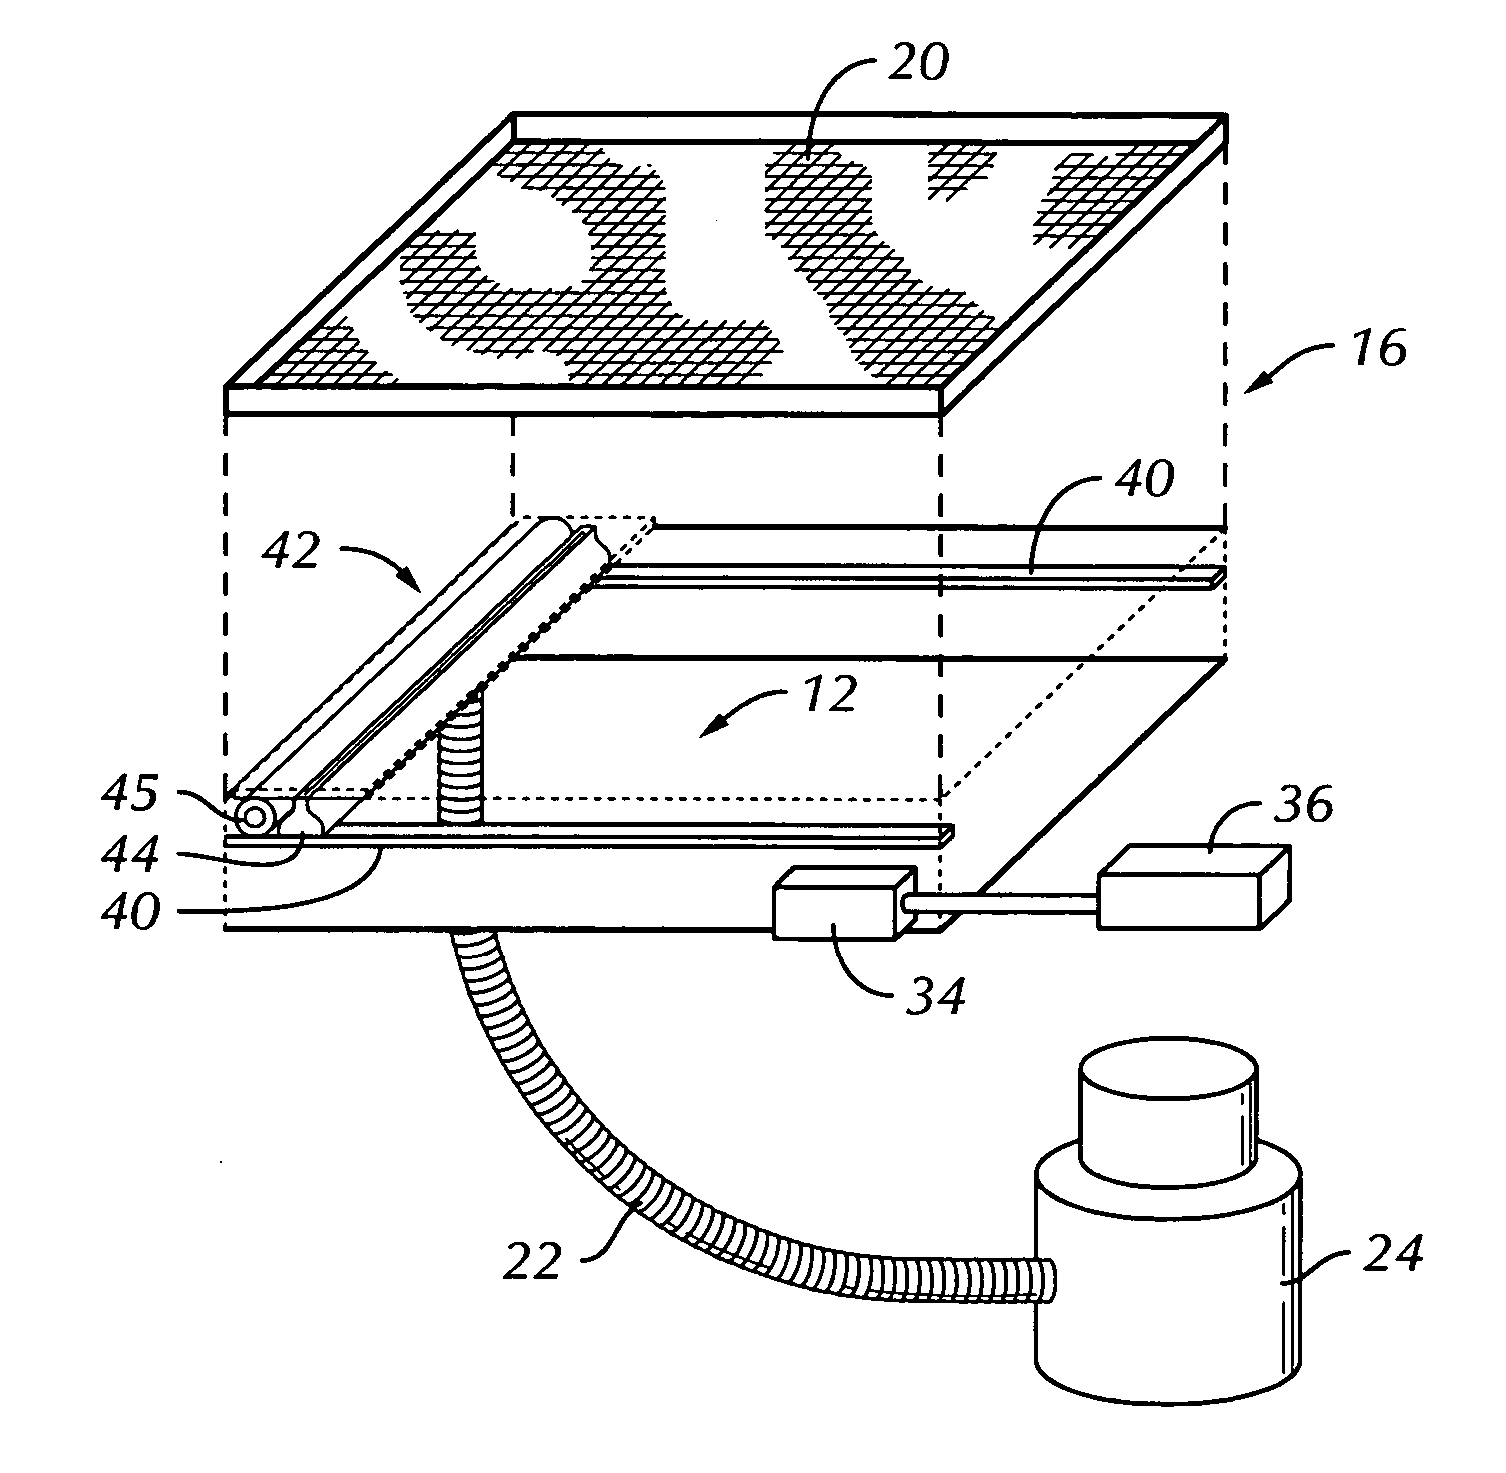 Automatic cleaning system for filtration of an air circulation system